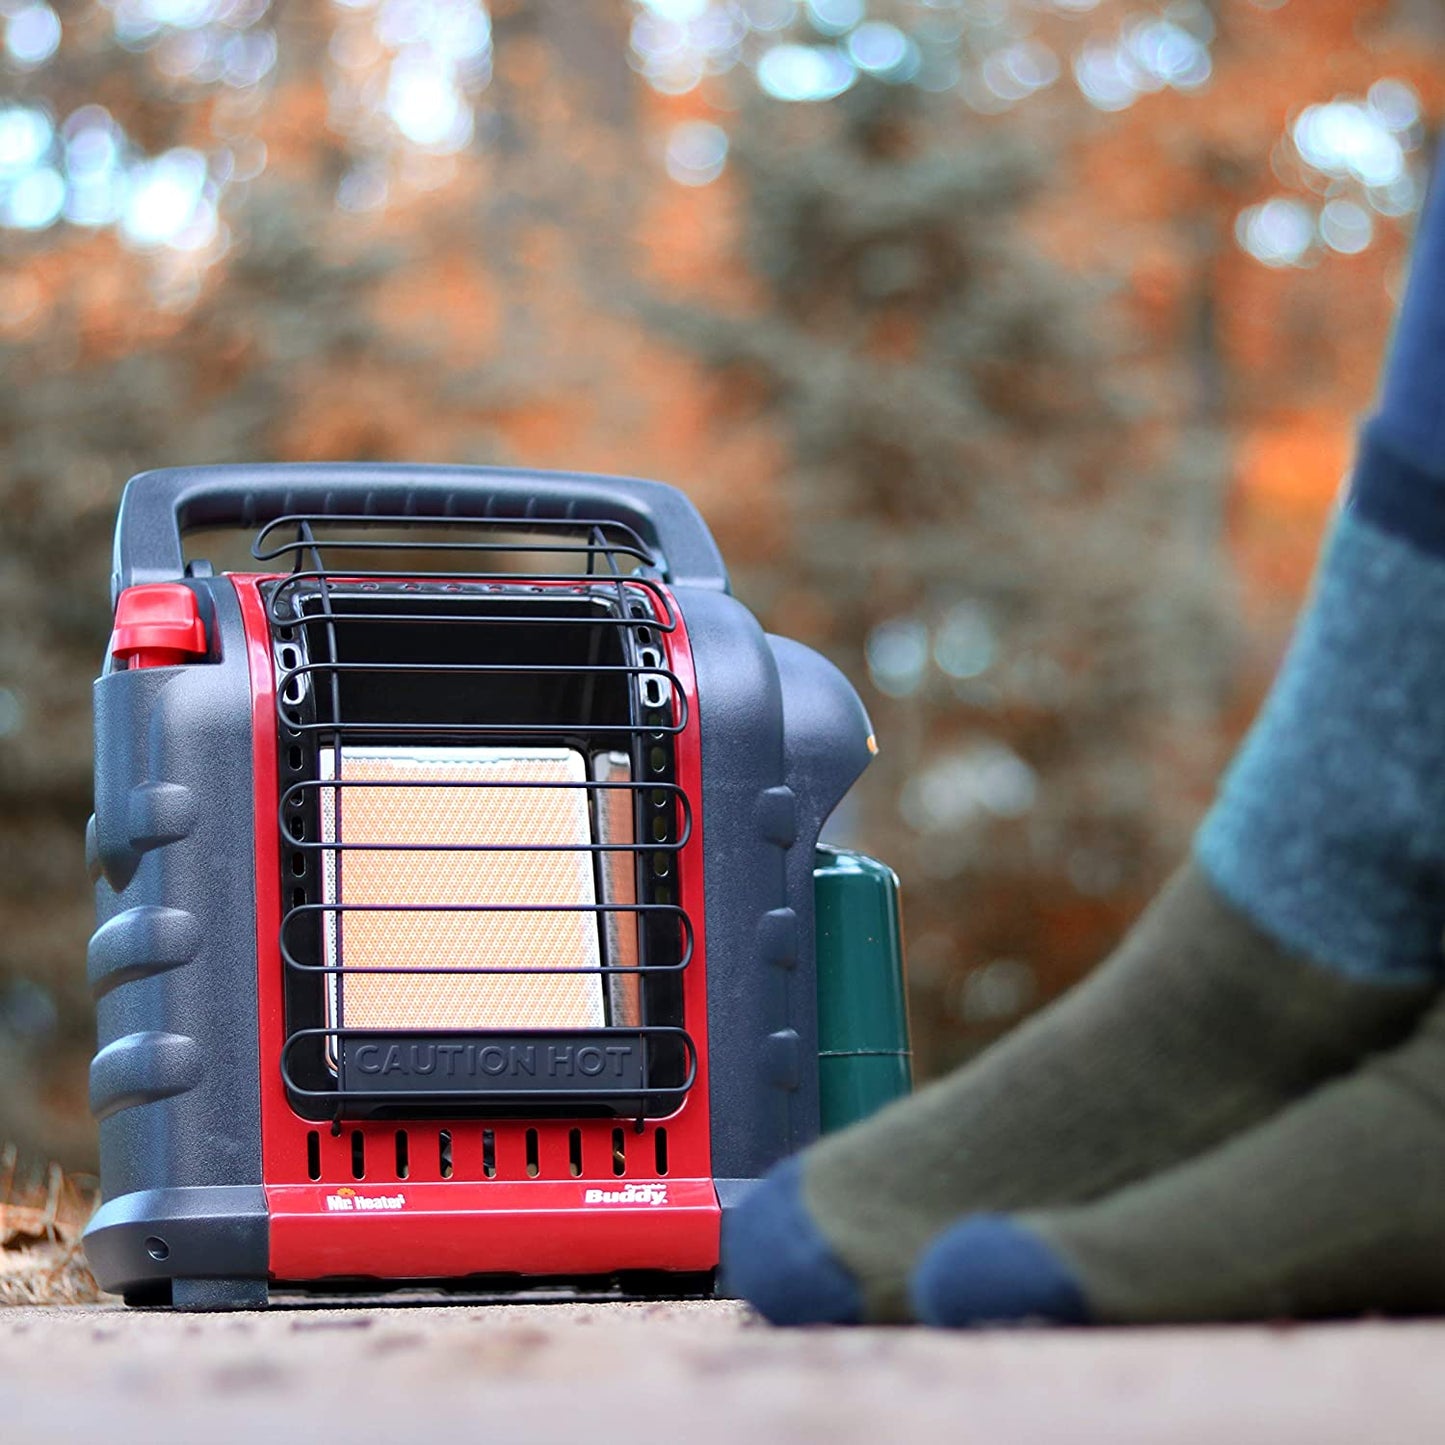 An indoor outdoor propane heater being used outdoors with a persons warming their feet near the heater.